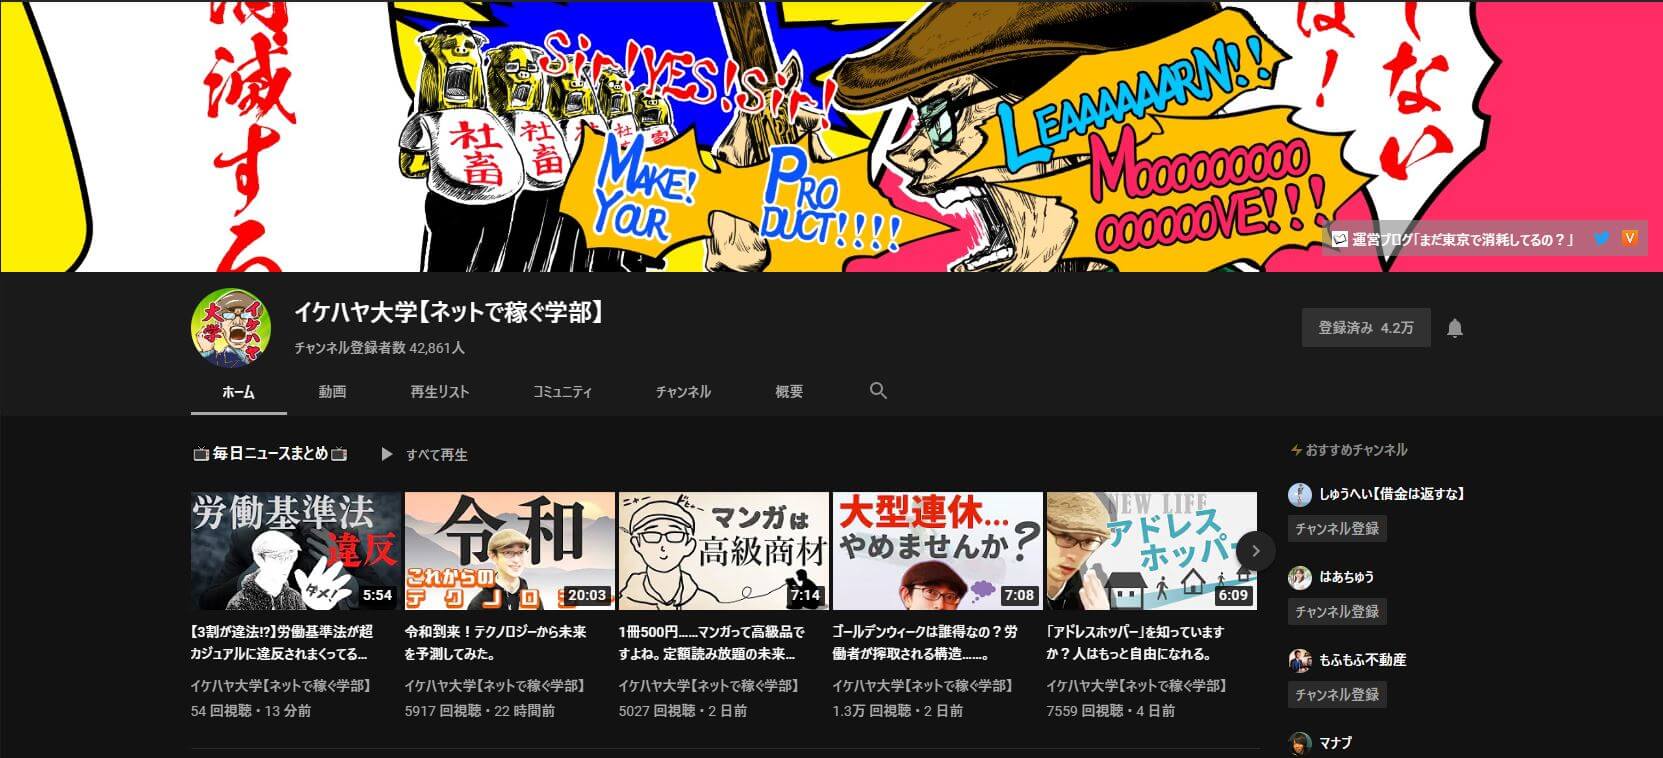 YouTuberのイケハヤ大学